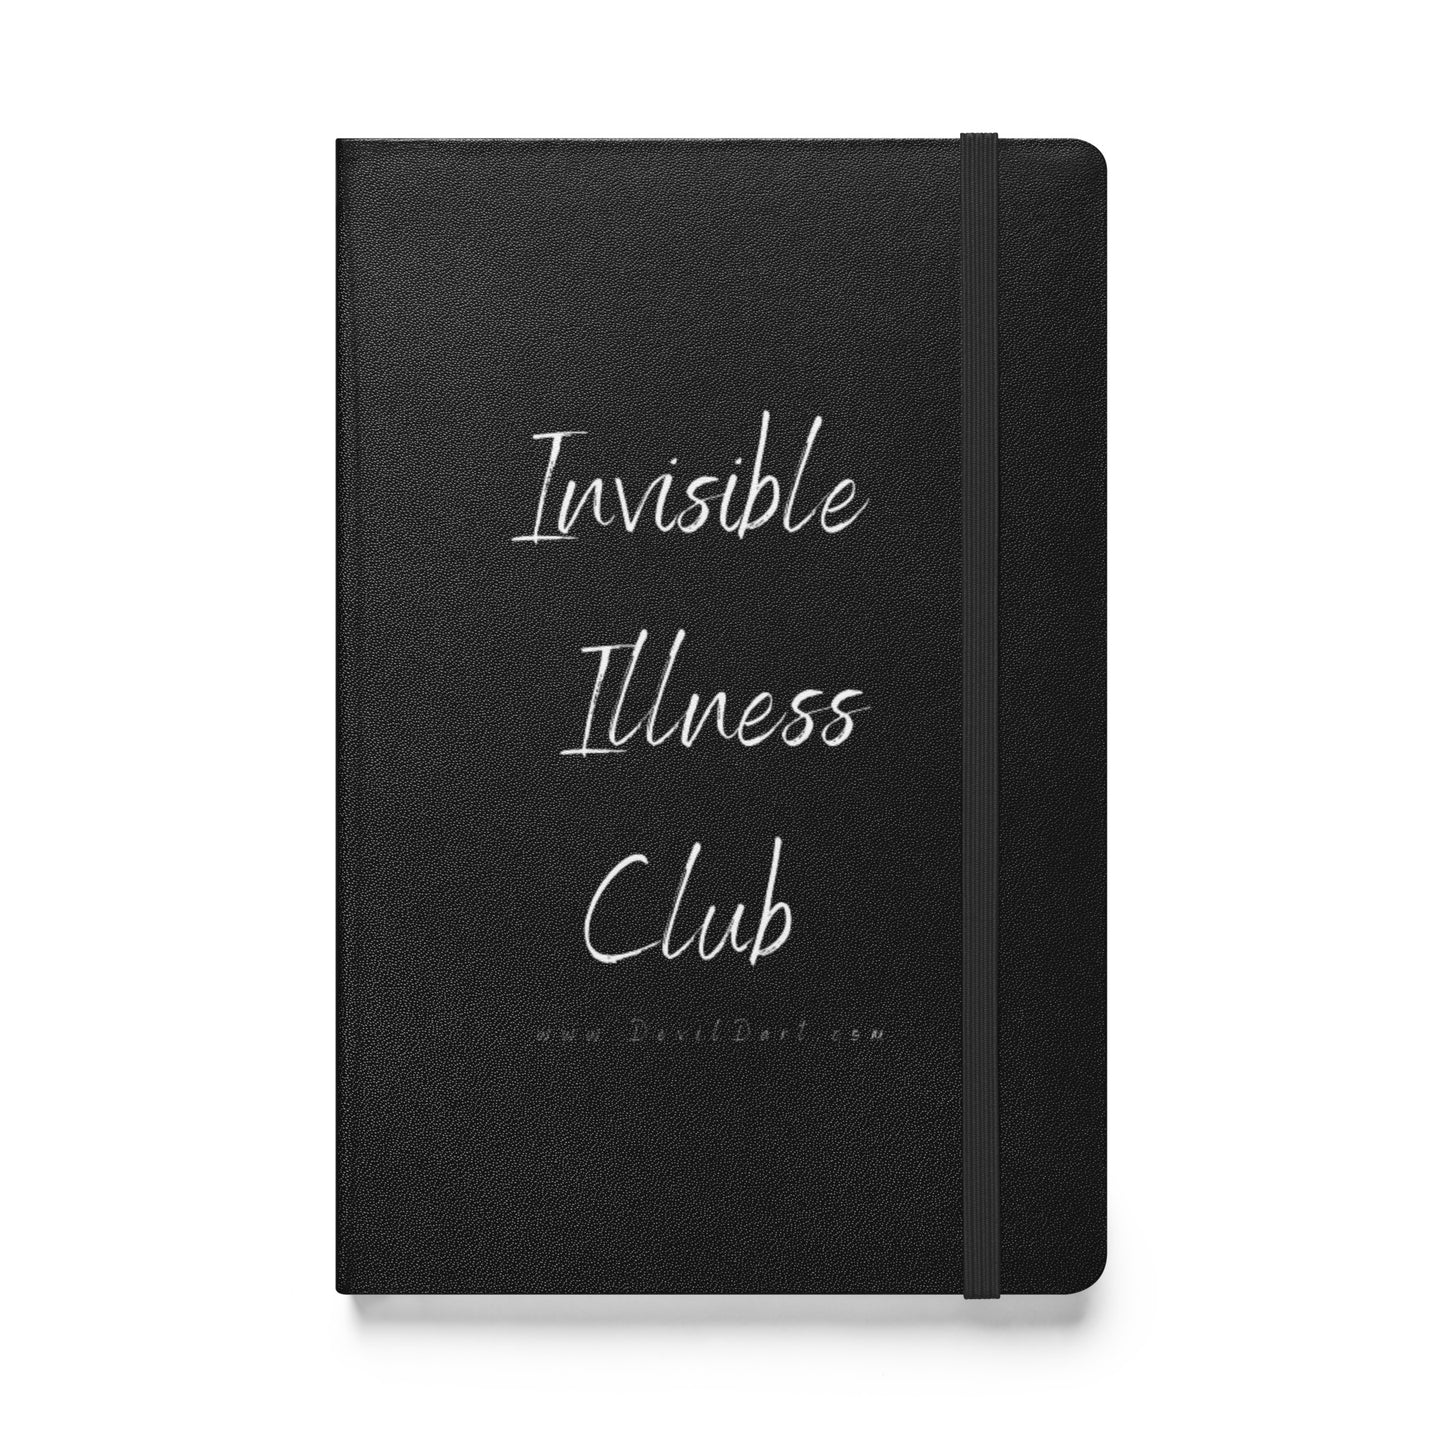 Hardcover Bound Symptoms Journal (Invisible Illness Club)